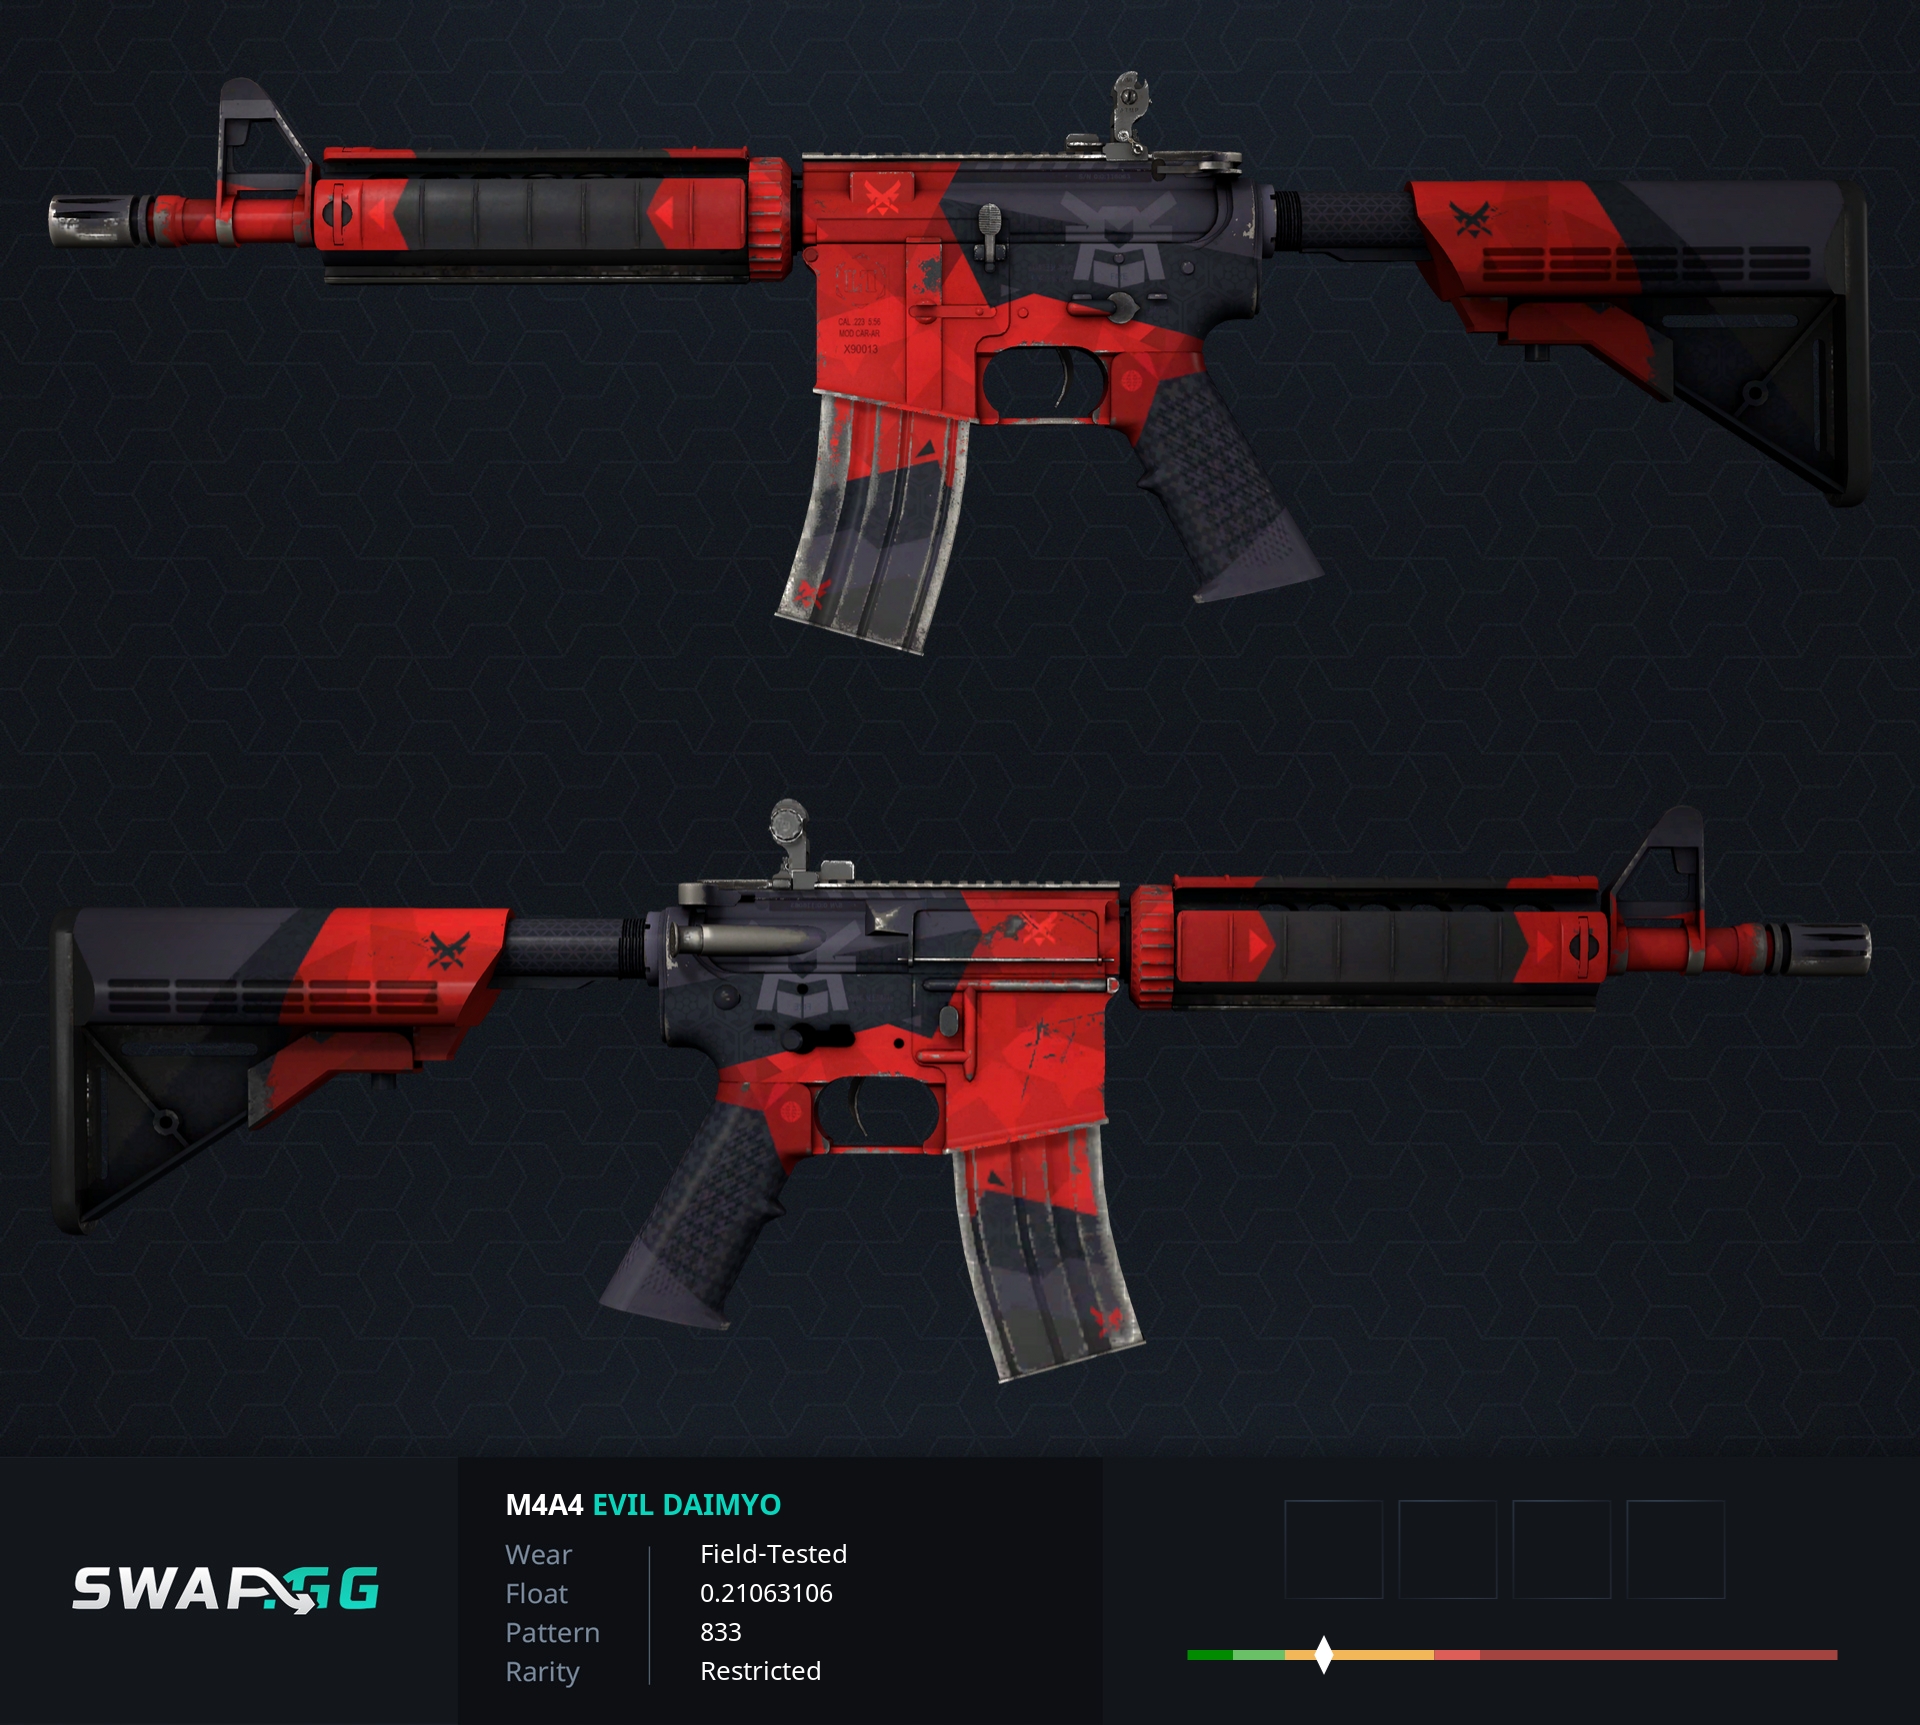 M4a4 dragon king field tested m4a4 фото 68